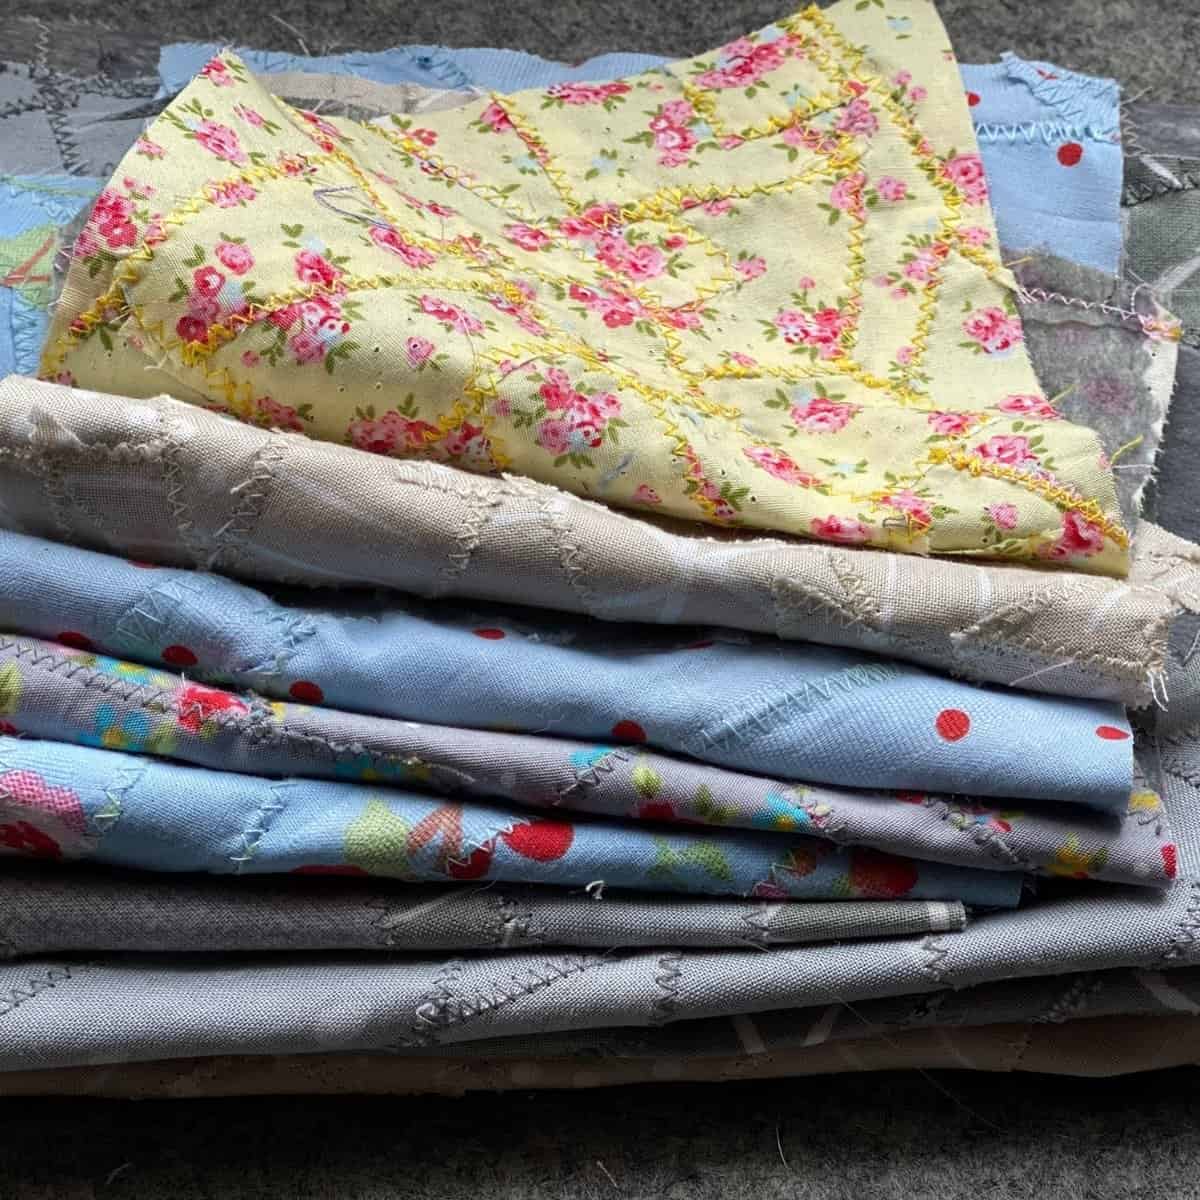 How to Make Yardage from your Quilting Scraps